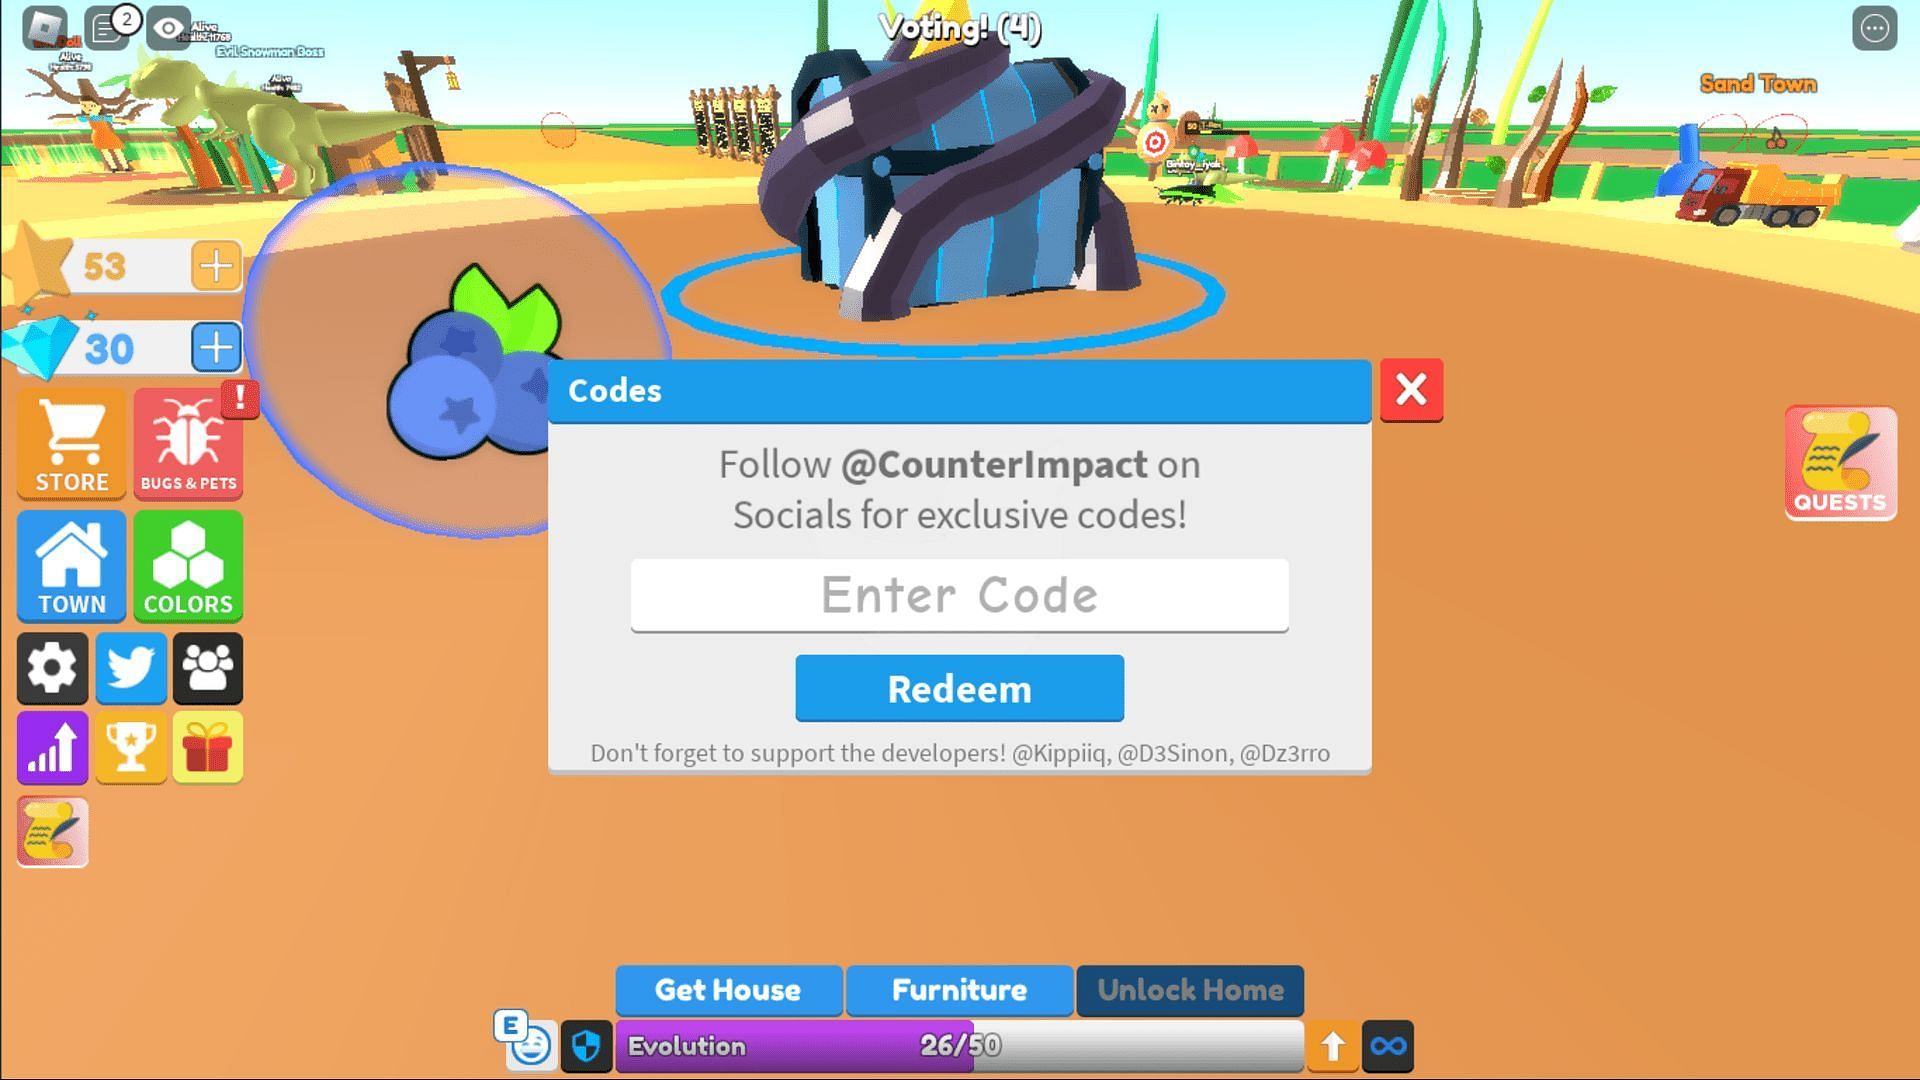 Redeem codes in Little World easily (Image via Roblox)